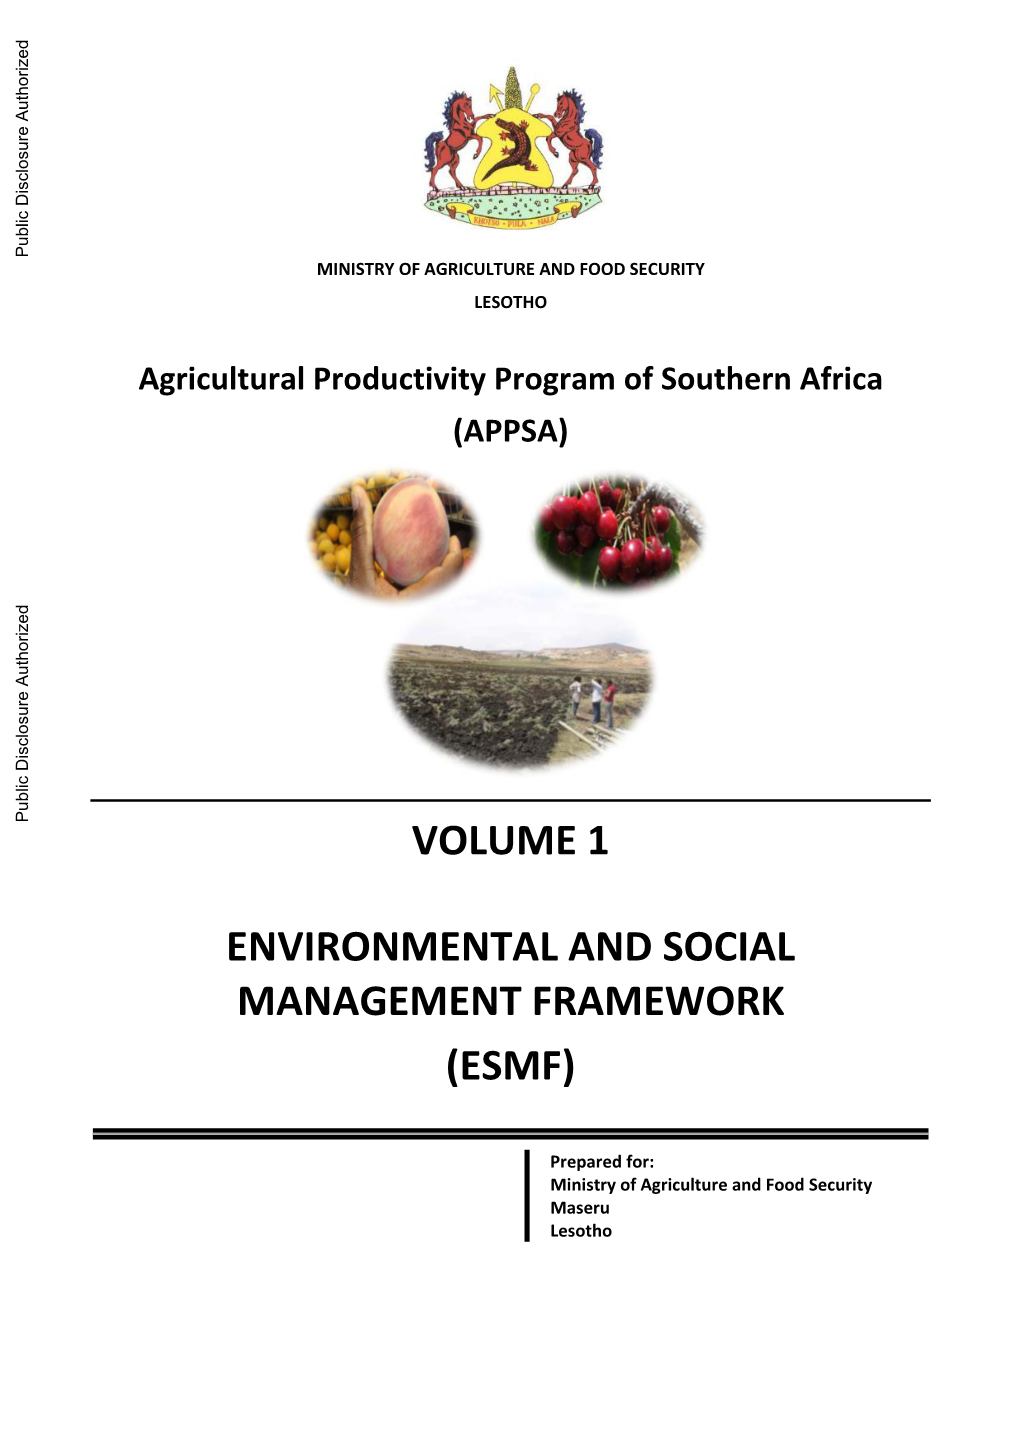 Agricultural Productivity Program of Southern Africa (APPSA) Public Disclosure Authorized